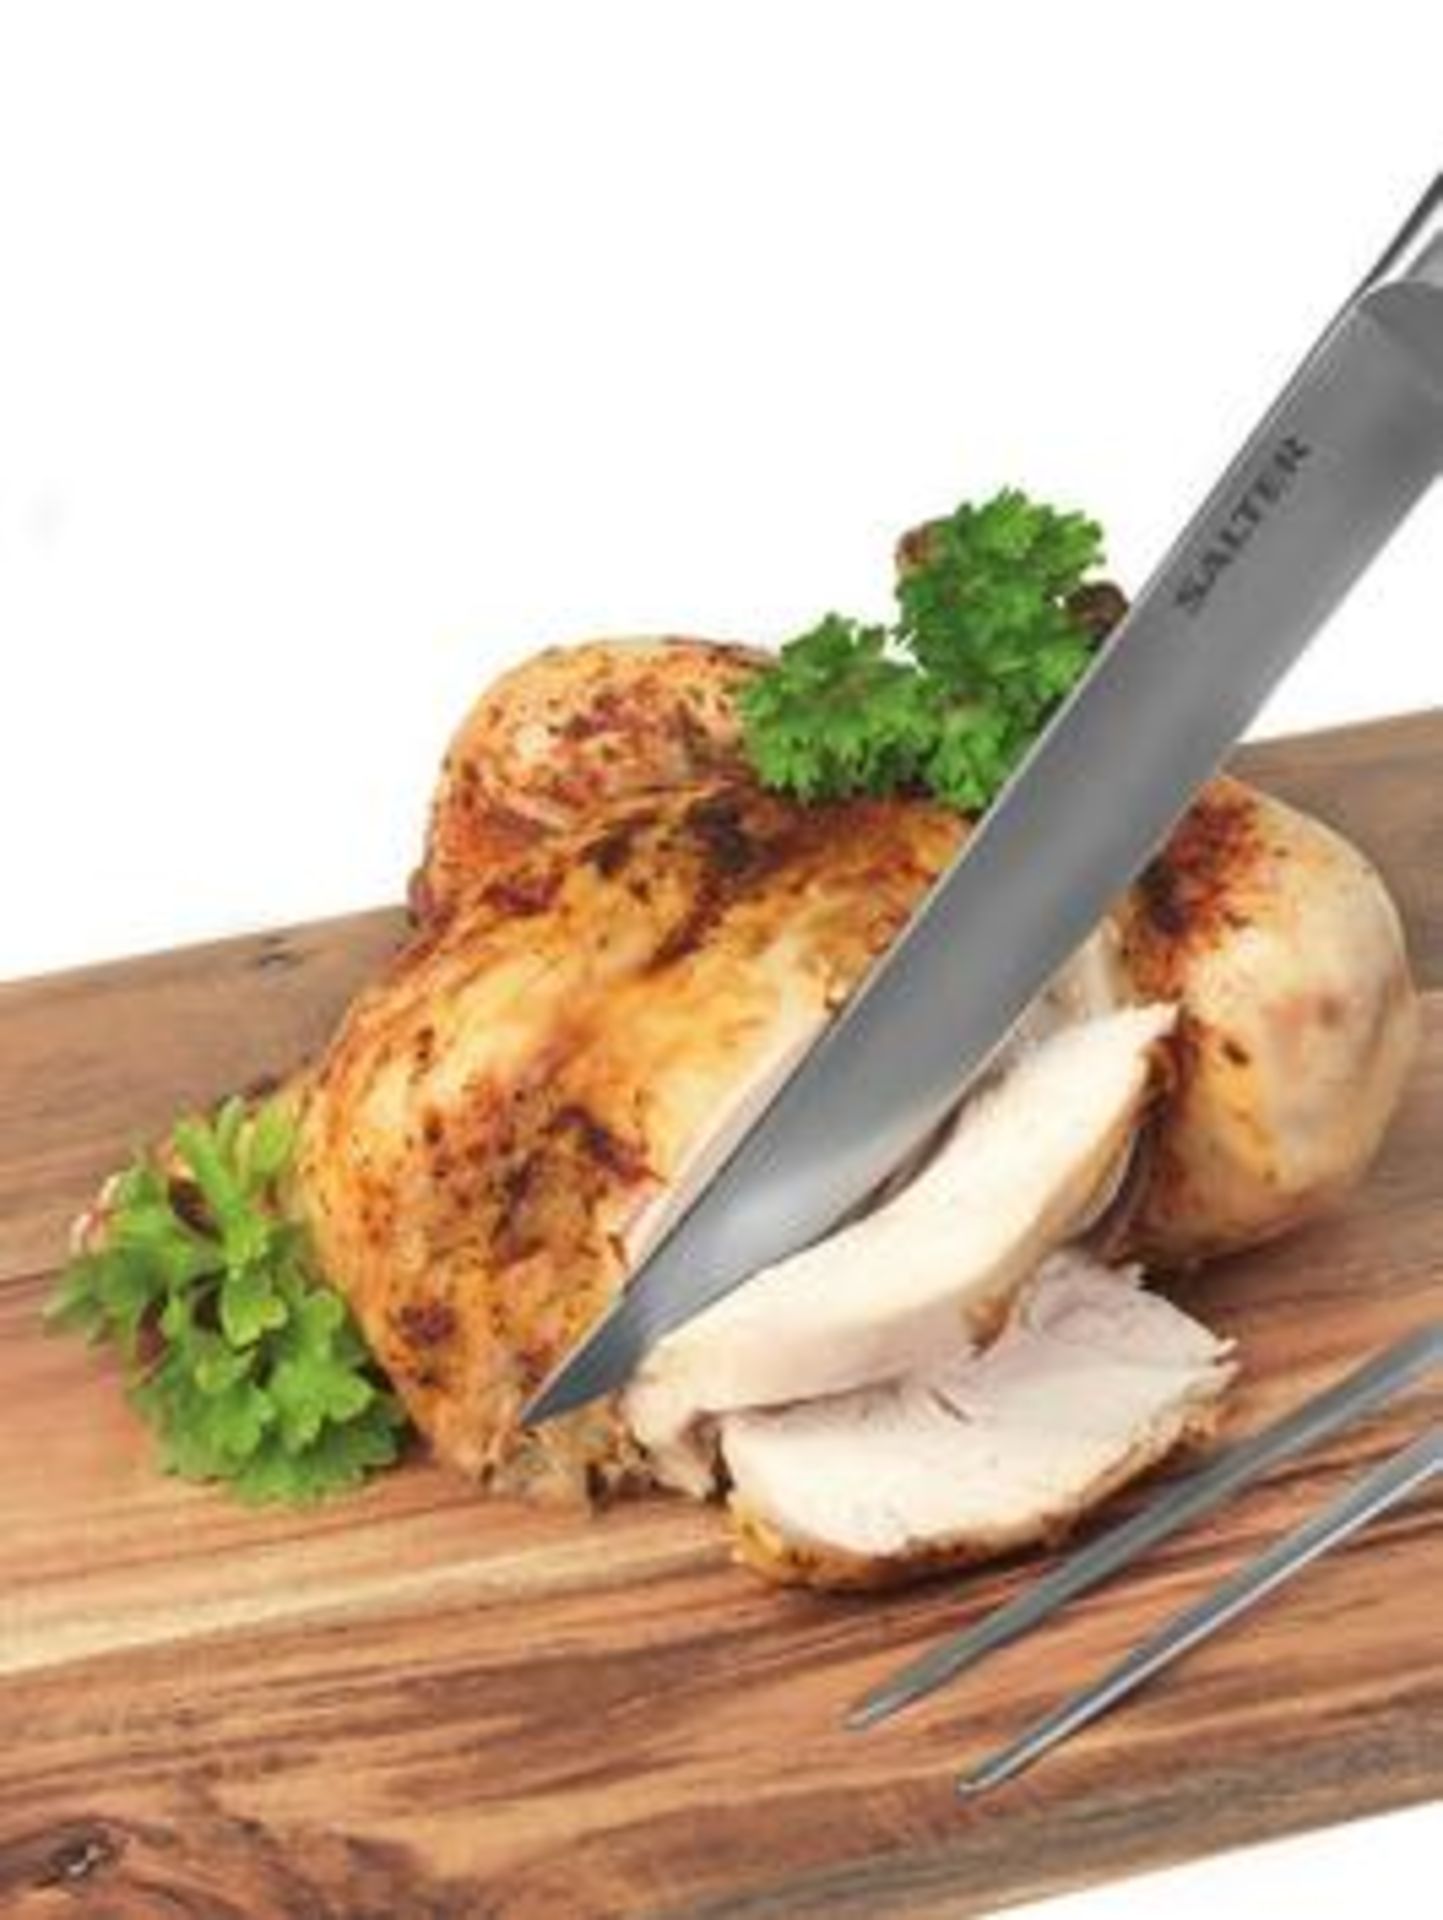 V Brand New Salter Elegance Carving Knife And Fork With Chopping Board ISP £46.99 (Mahahome.com) - Image 2 of 2